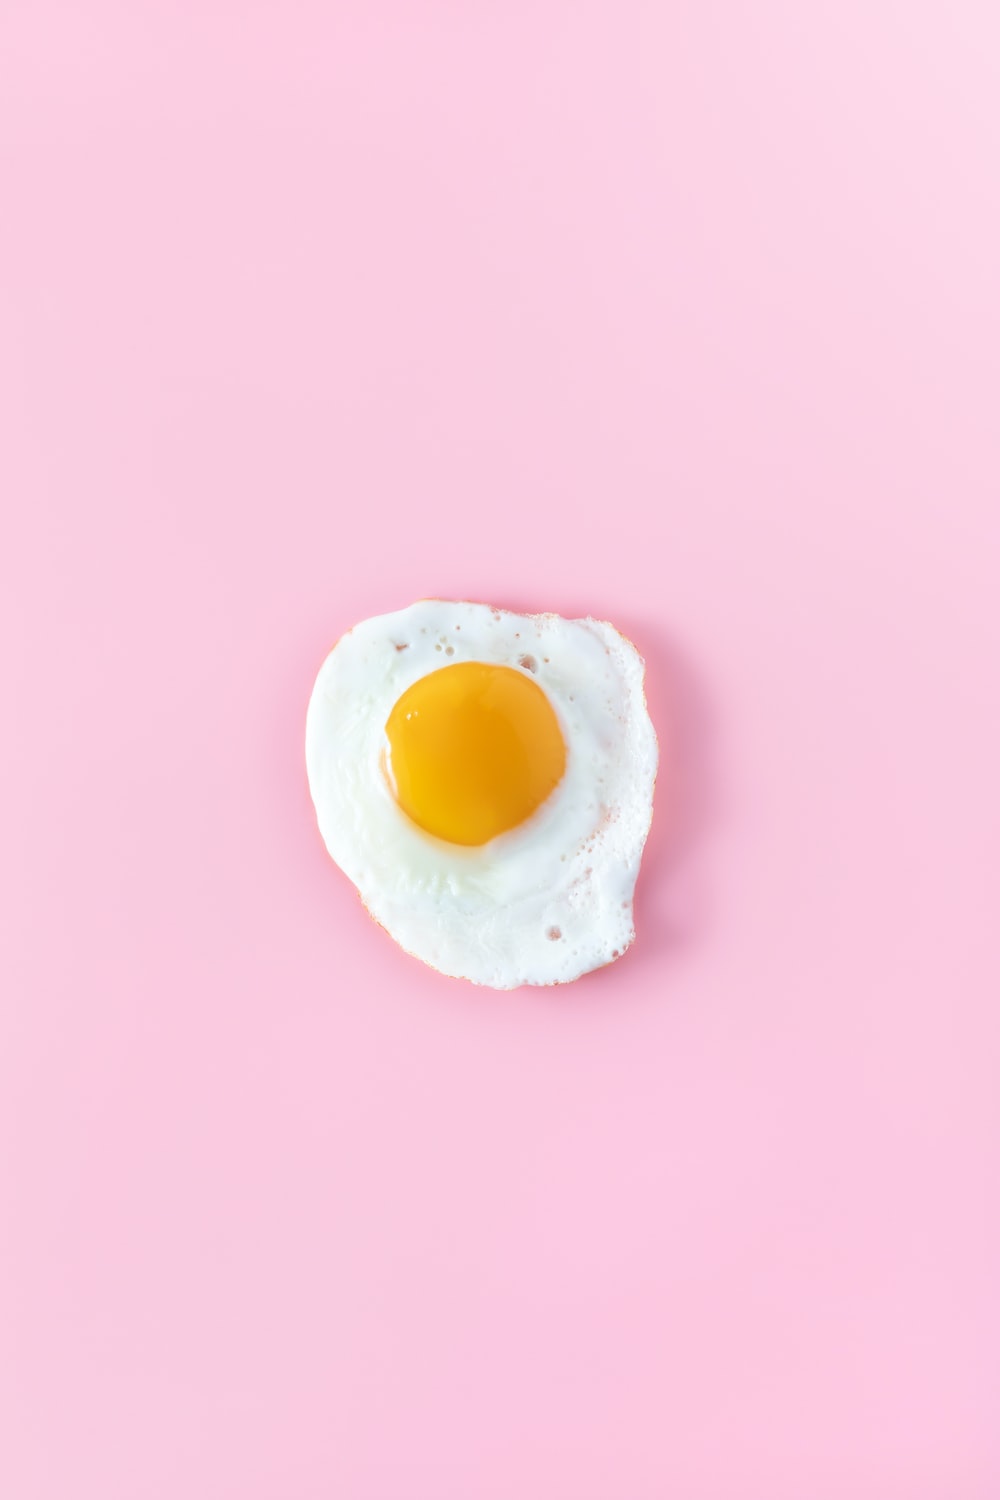 Fried Egg Picture. Download Free Image